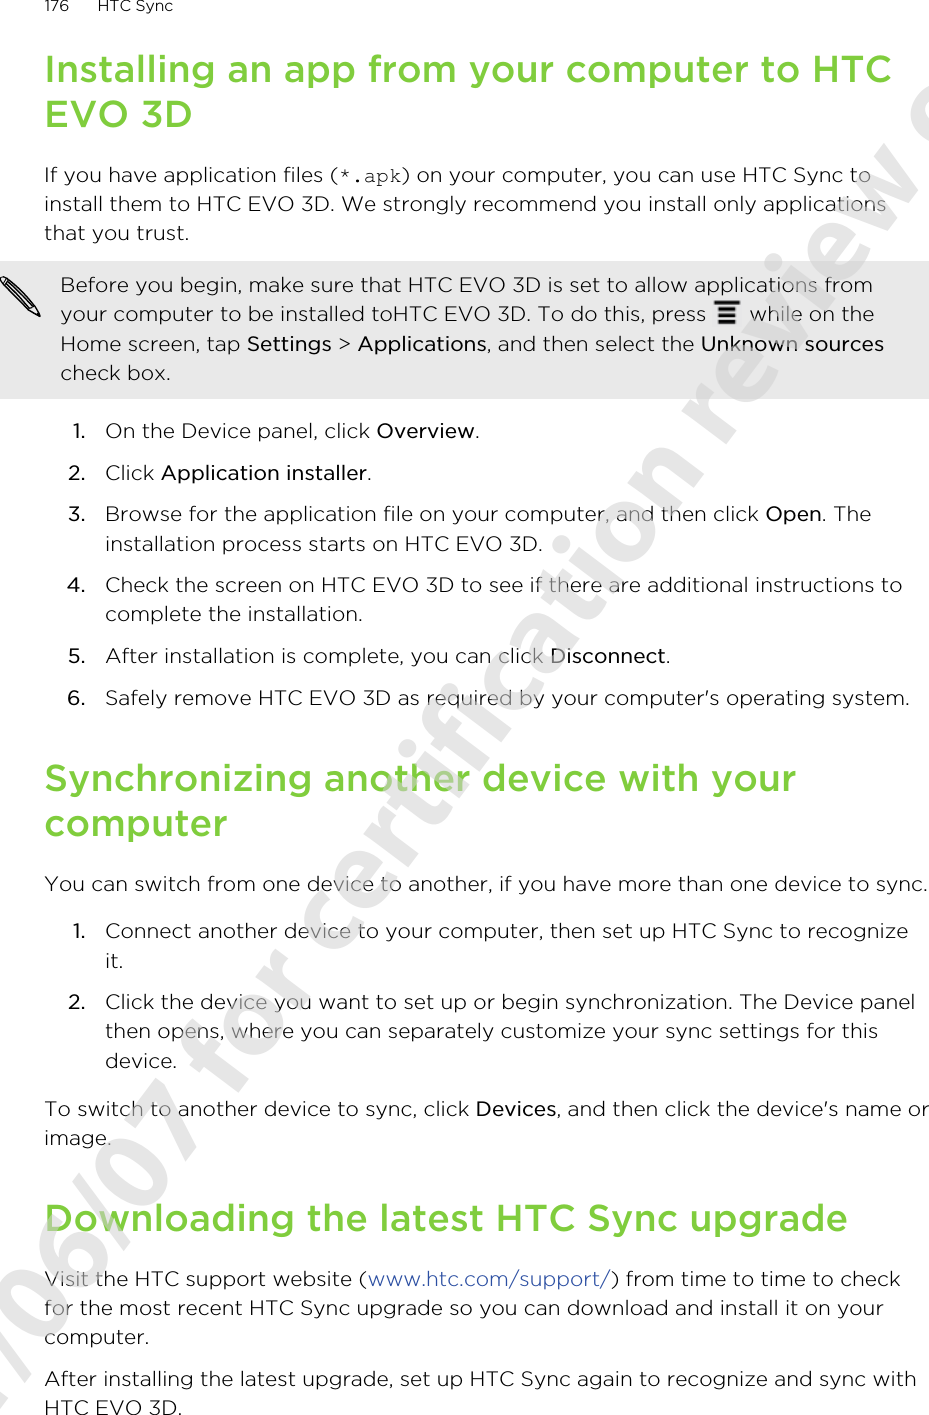 Installing an app from your computer to HTCEVO 3DIf you have application files (*.apk) on your computer, you can use HTC Sync toinstall them to HTC EVO 3D. We strongly recommend you install only applicationsthat you trust.Before you begin, make sure that HTC EVO 3D is set to allow applications fromyour computer to be installed toHTC EVO 3D. To do this, press   while on theHome screen, tap Settings &gt; Applications, and then select the Unknown sourcescheck box.1. On the Device panel, click Overview.2. Click Application installer.3. Browse for the application file on your computer, and then click Open. Theinstallation process starts on HTC EVO 3D.4. Check the screen on HTC EVO 3D to see if there are additional instructions tocomplete the installation.5. After installation is complete, you can click Disconnect.6. Safely remove HTC EVO 3D as required by your computer&apos;s operating system.Synchronizing another device with yourcomputerYou can switch from one device to another, if you have more than one device to sync.1. Connect another device to your computer, then set up HTC Sync to recognizeit.2. Click the device you want to set up or begin synchronization. The Device panelthen opens, where you can separately customize your sync settings for thisdevice.To switch to another device to sync, click Devices, and then click the device&apos;s name orimage.Downloading the latest HTC Sync upgradeVisit the HTC support website (www.htc.com/support/) from time to time to checkfor the most recent HTC Sync upgrade so you can download and install it on yourcomputer.After installing the latest upgrade, set up HTC Sync again to recognize and sync withHTC EVO 3D.176 HTC Sync2011/06/07 for certification review only